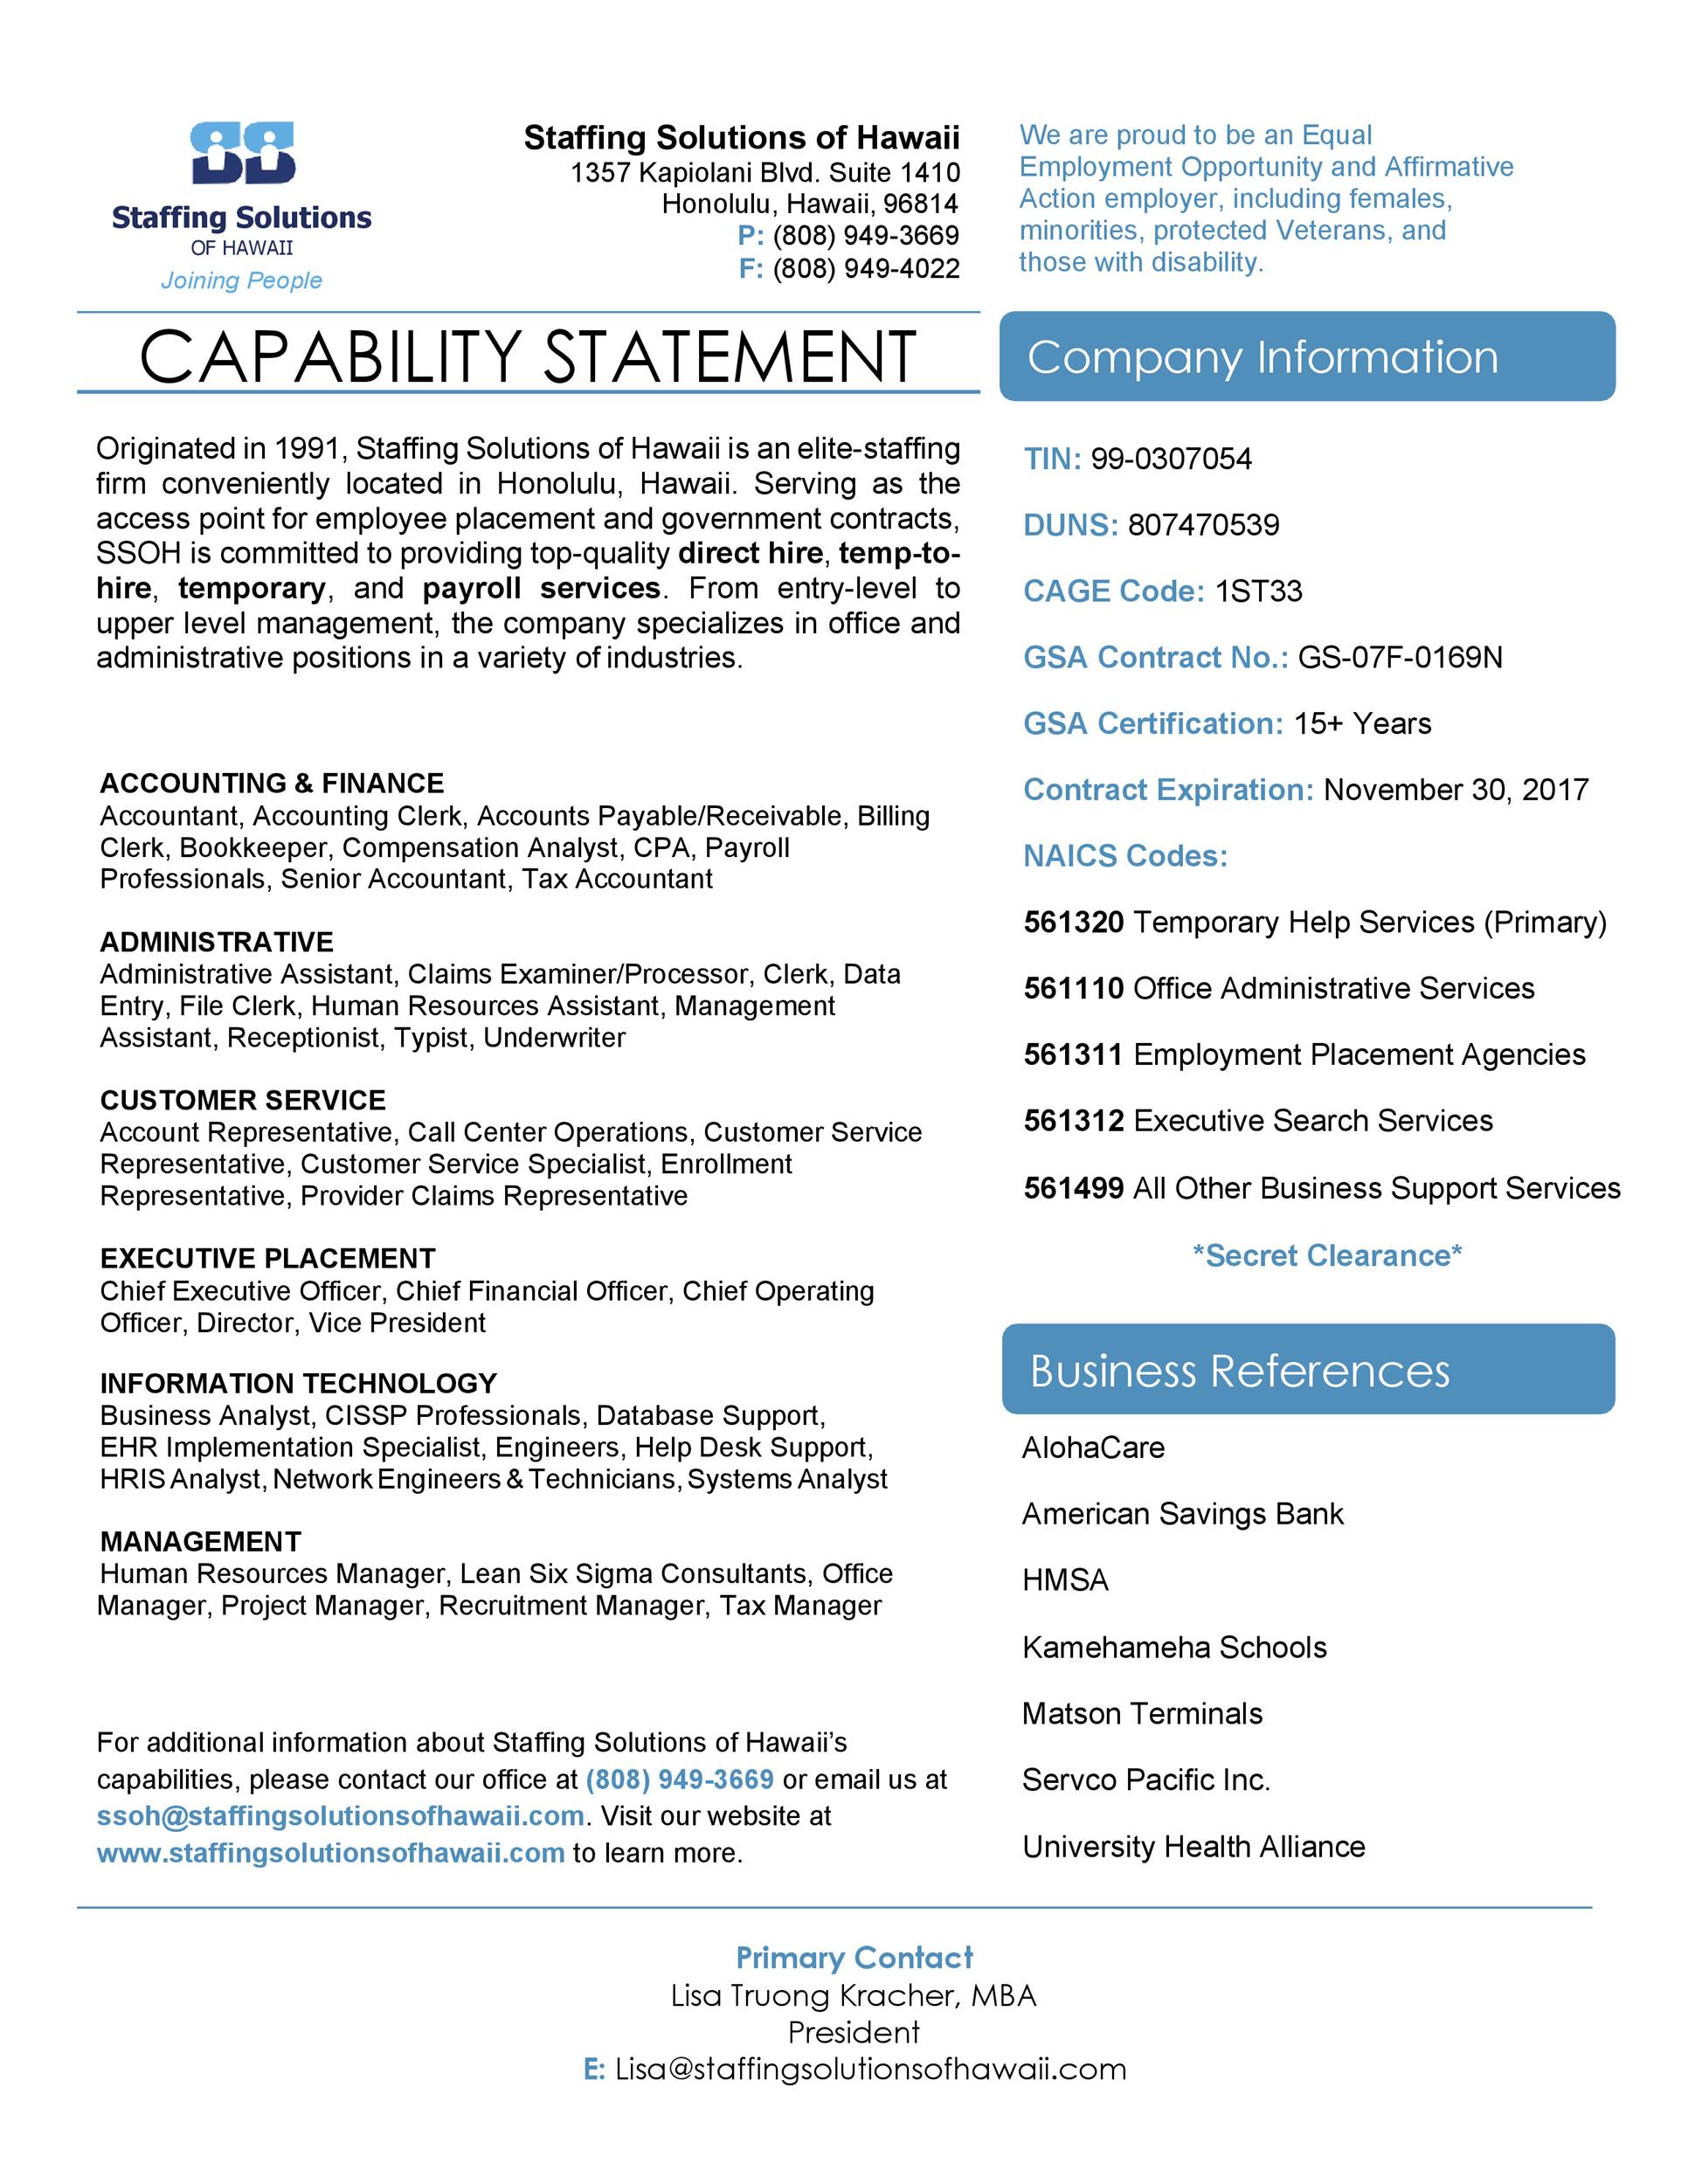 Sample Capability Statement Template